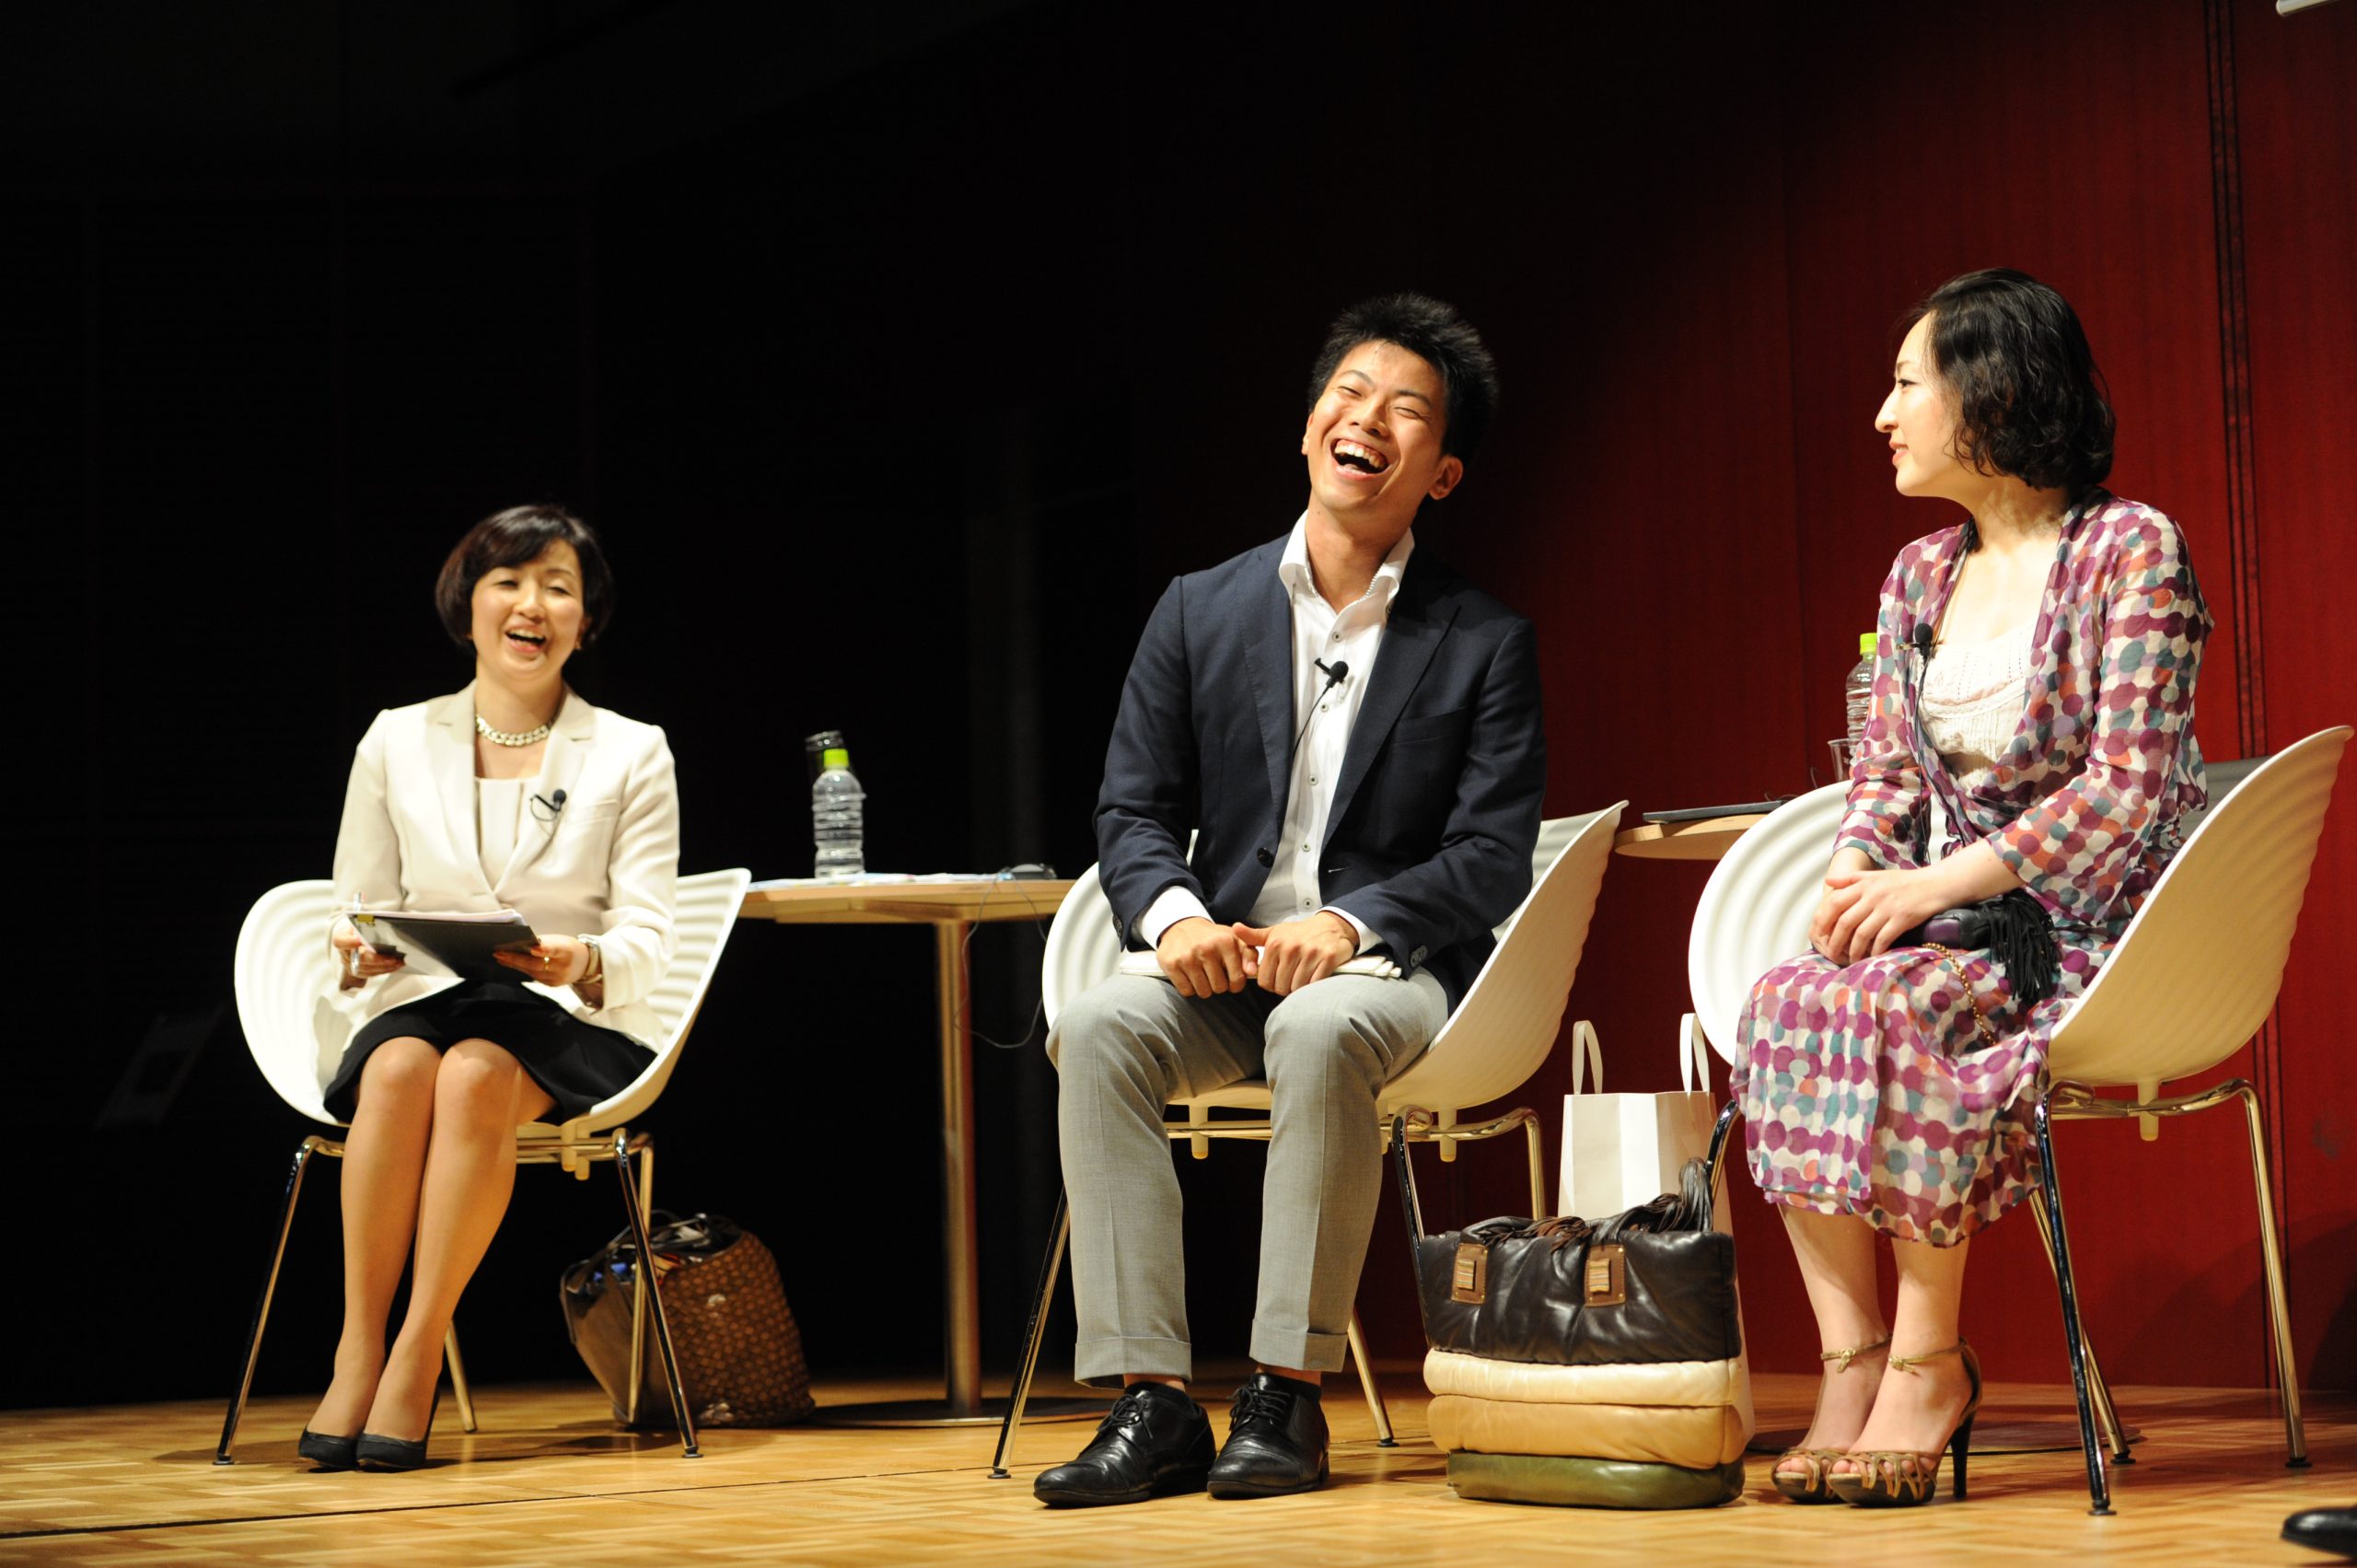 Two women in business dresses and a man in a blazer and slacks sit on a stage, laughing.